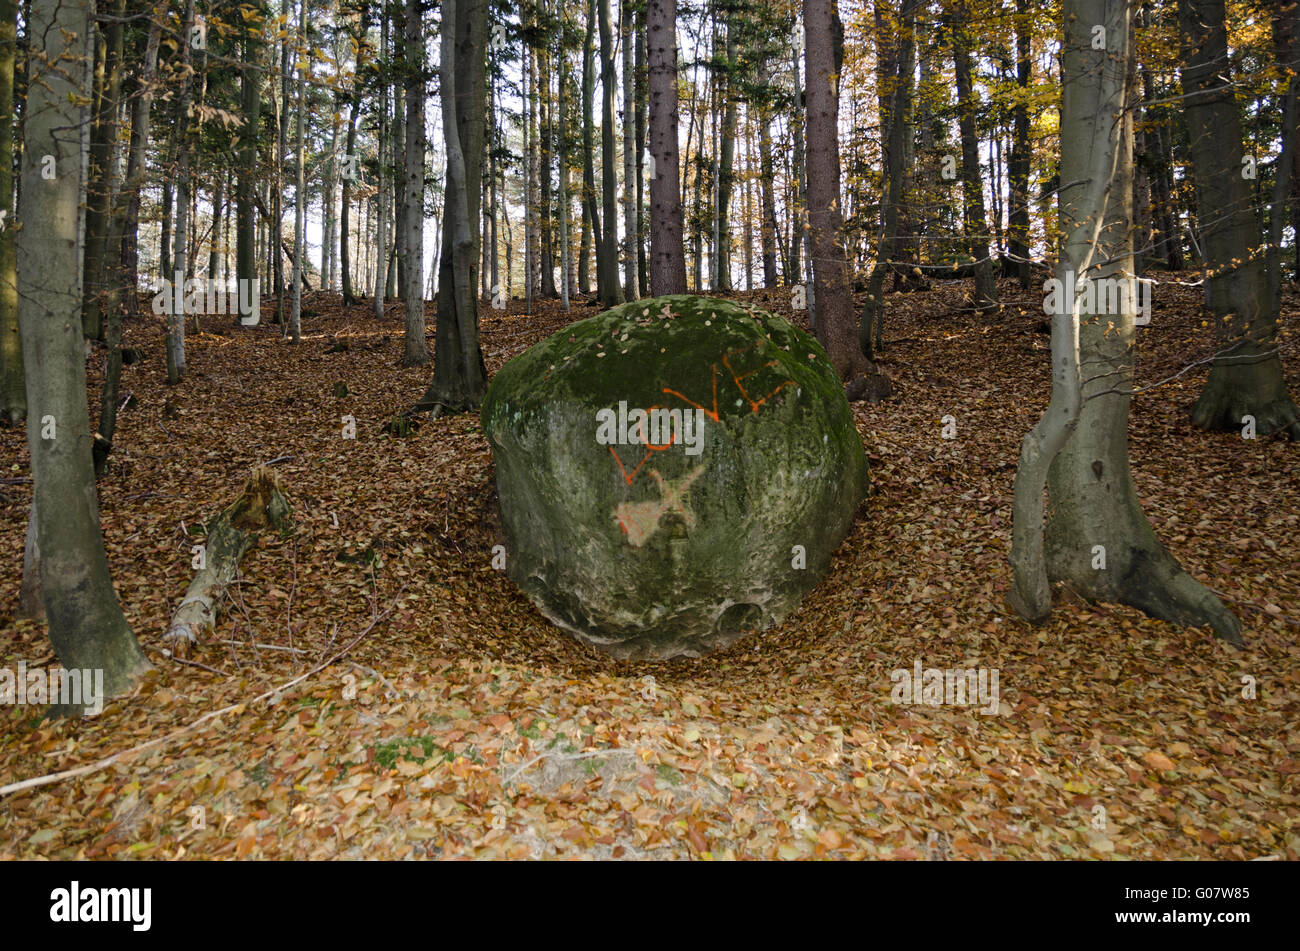 single globular rock in the forest labeled Love, Stock Photo